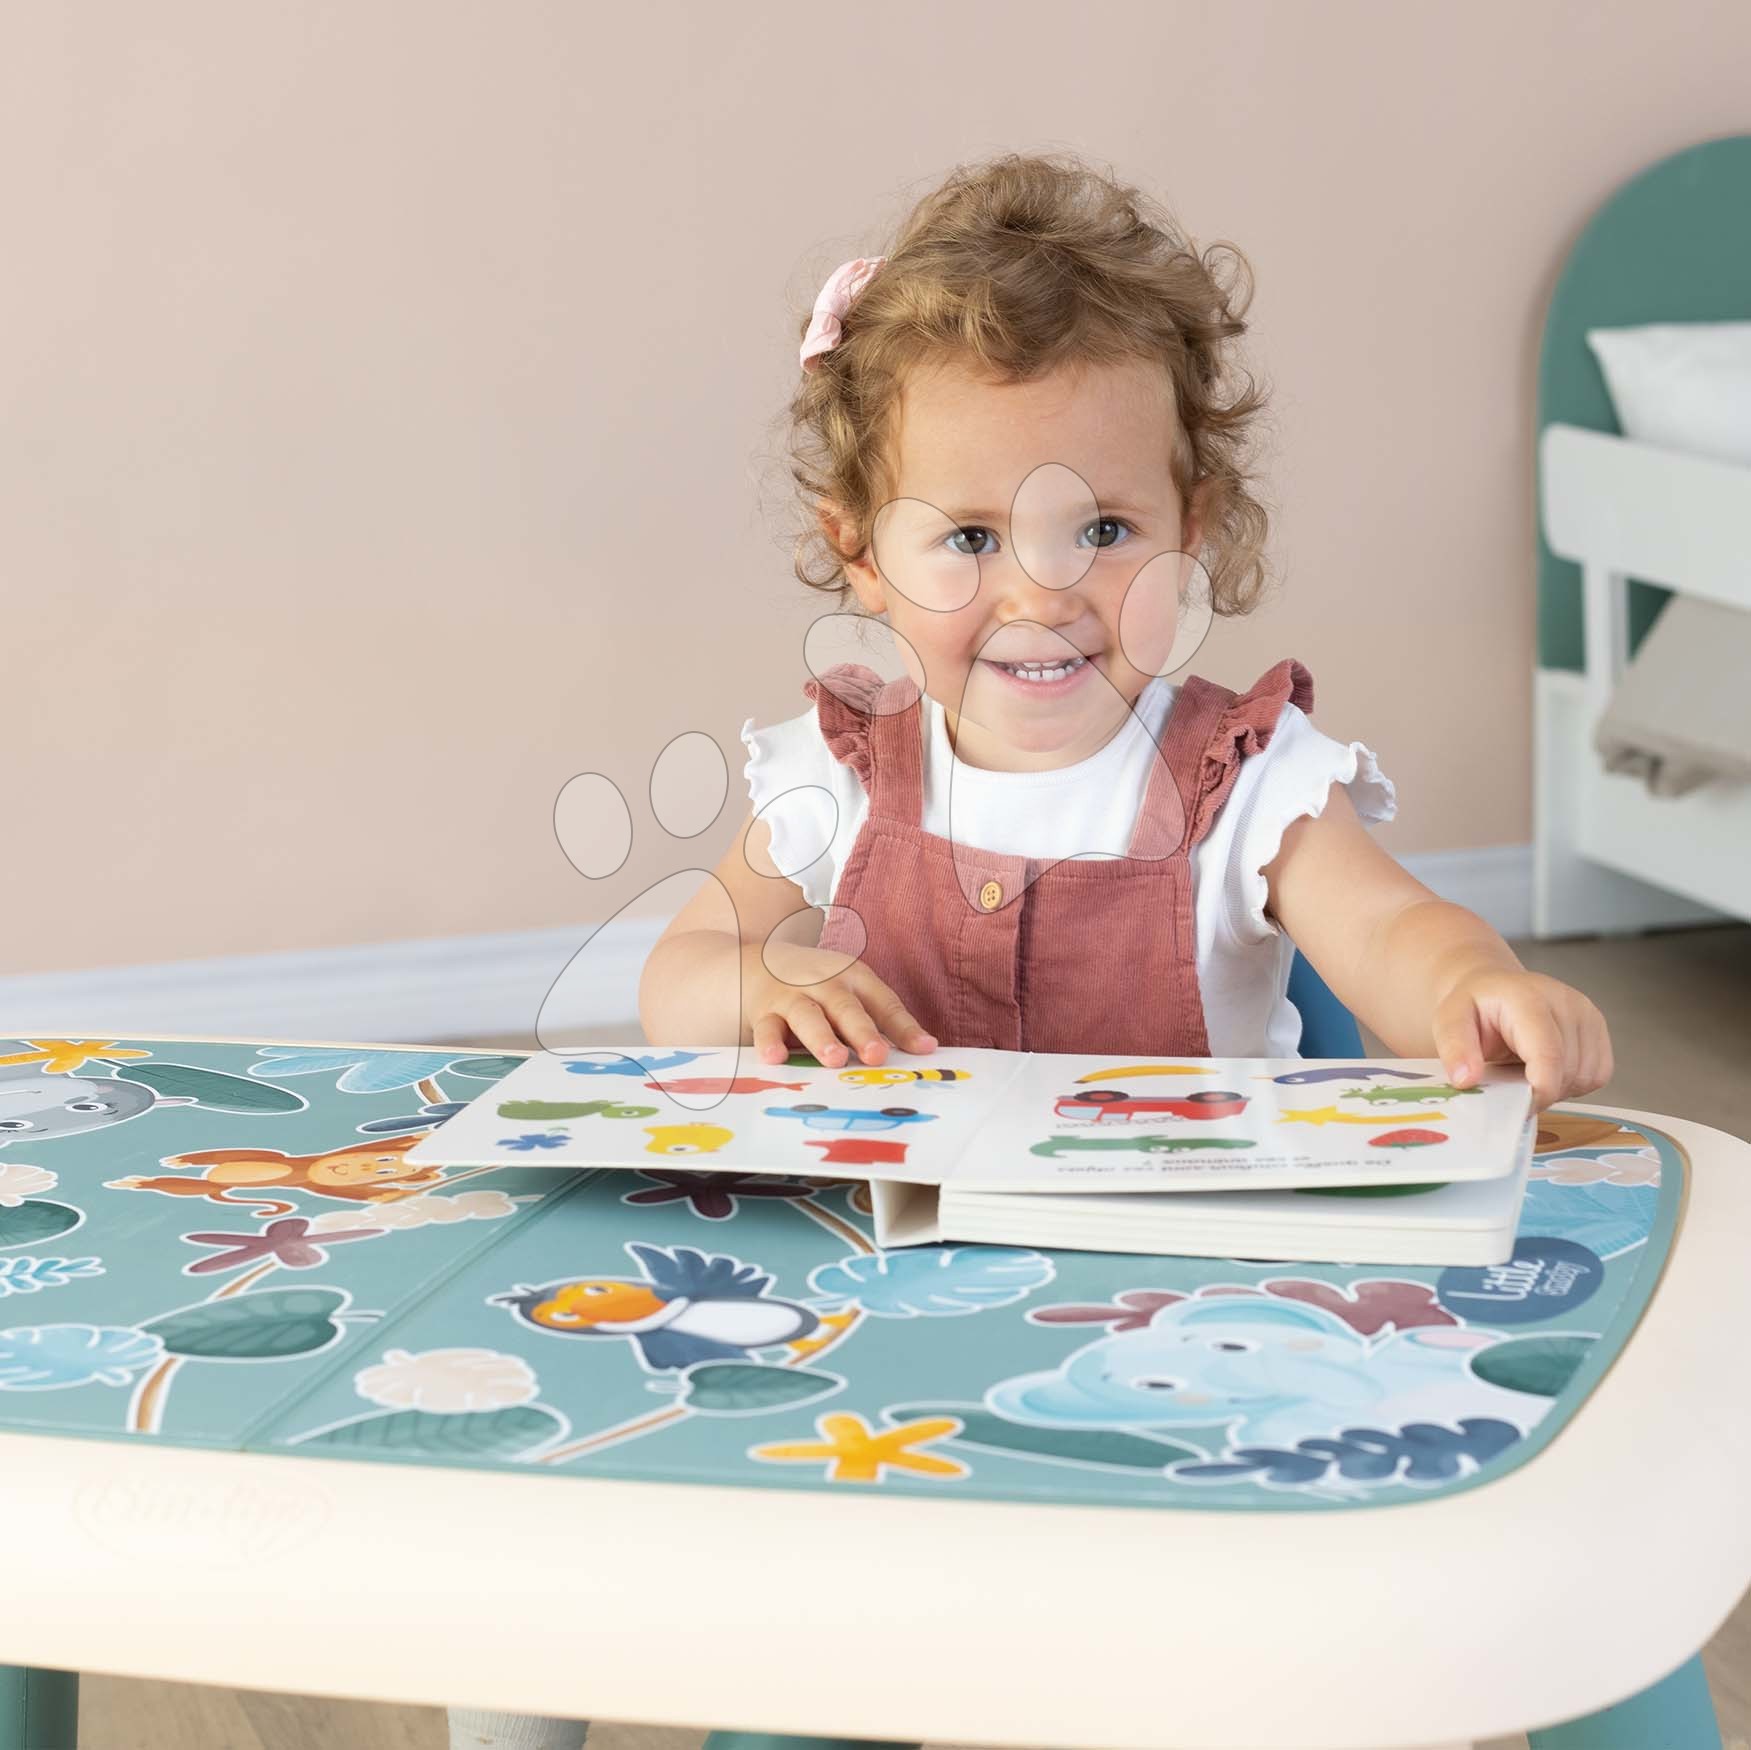 Little Smoby Activity Table - SMOBY - green